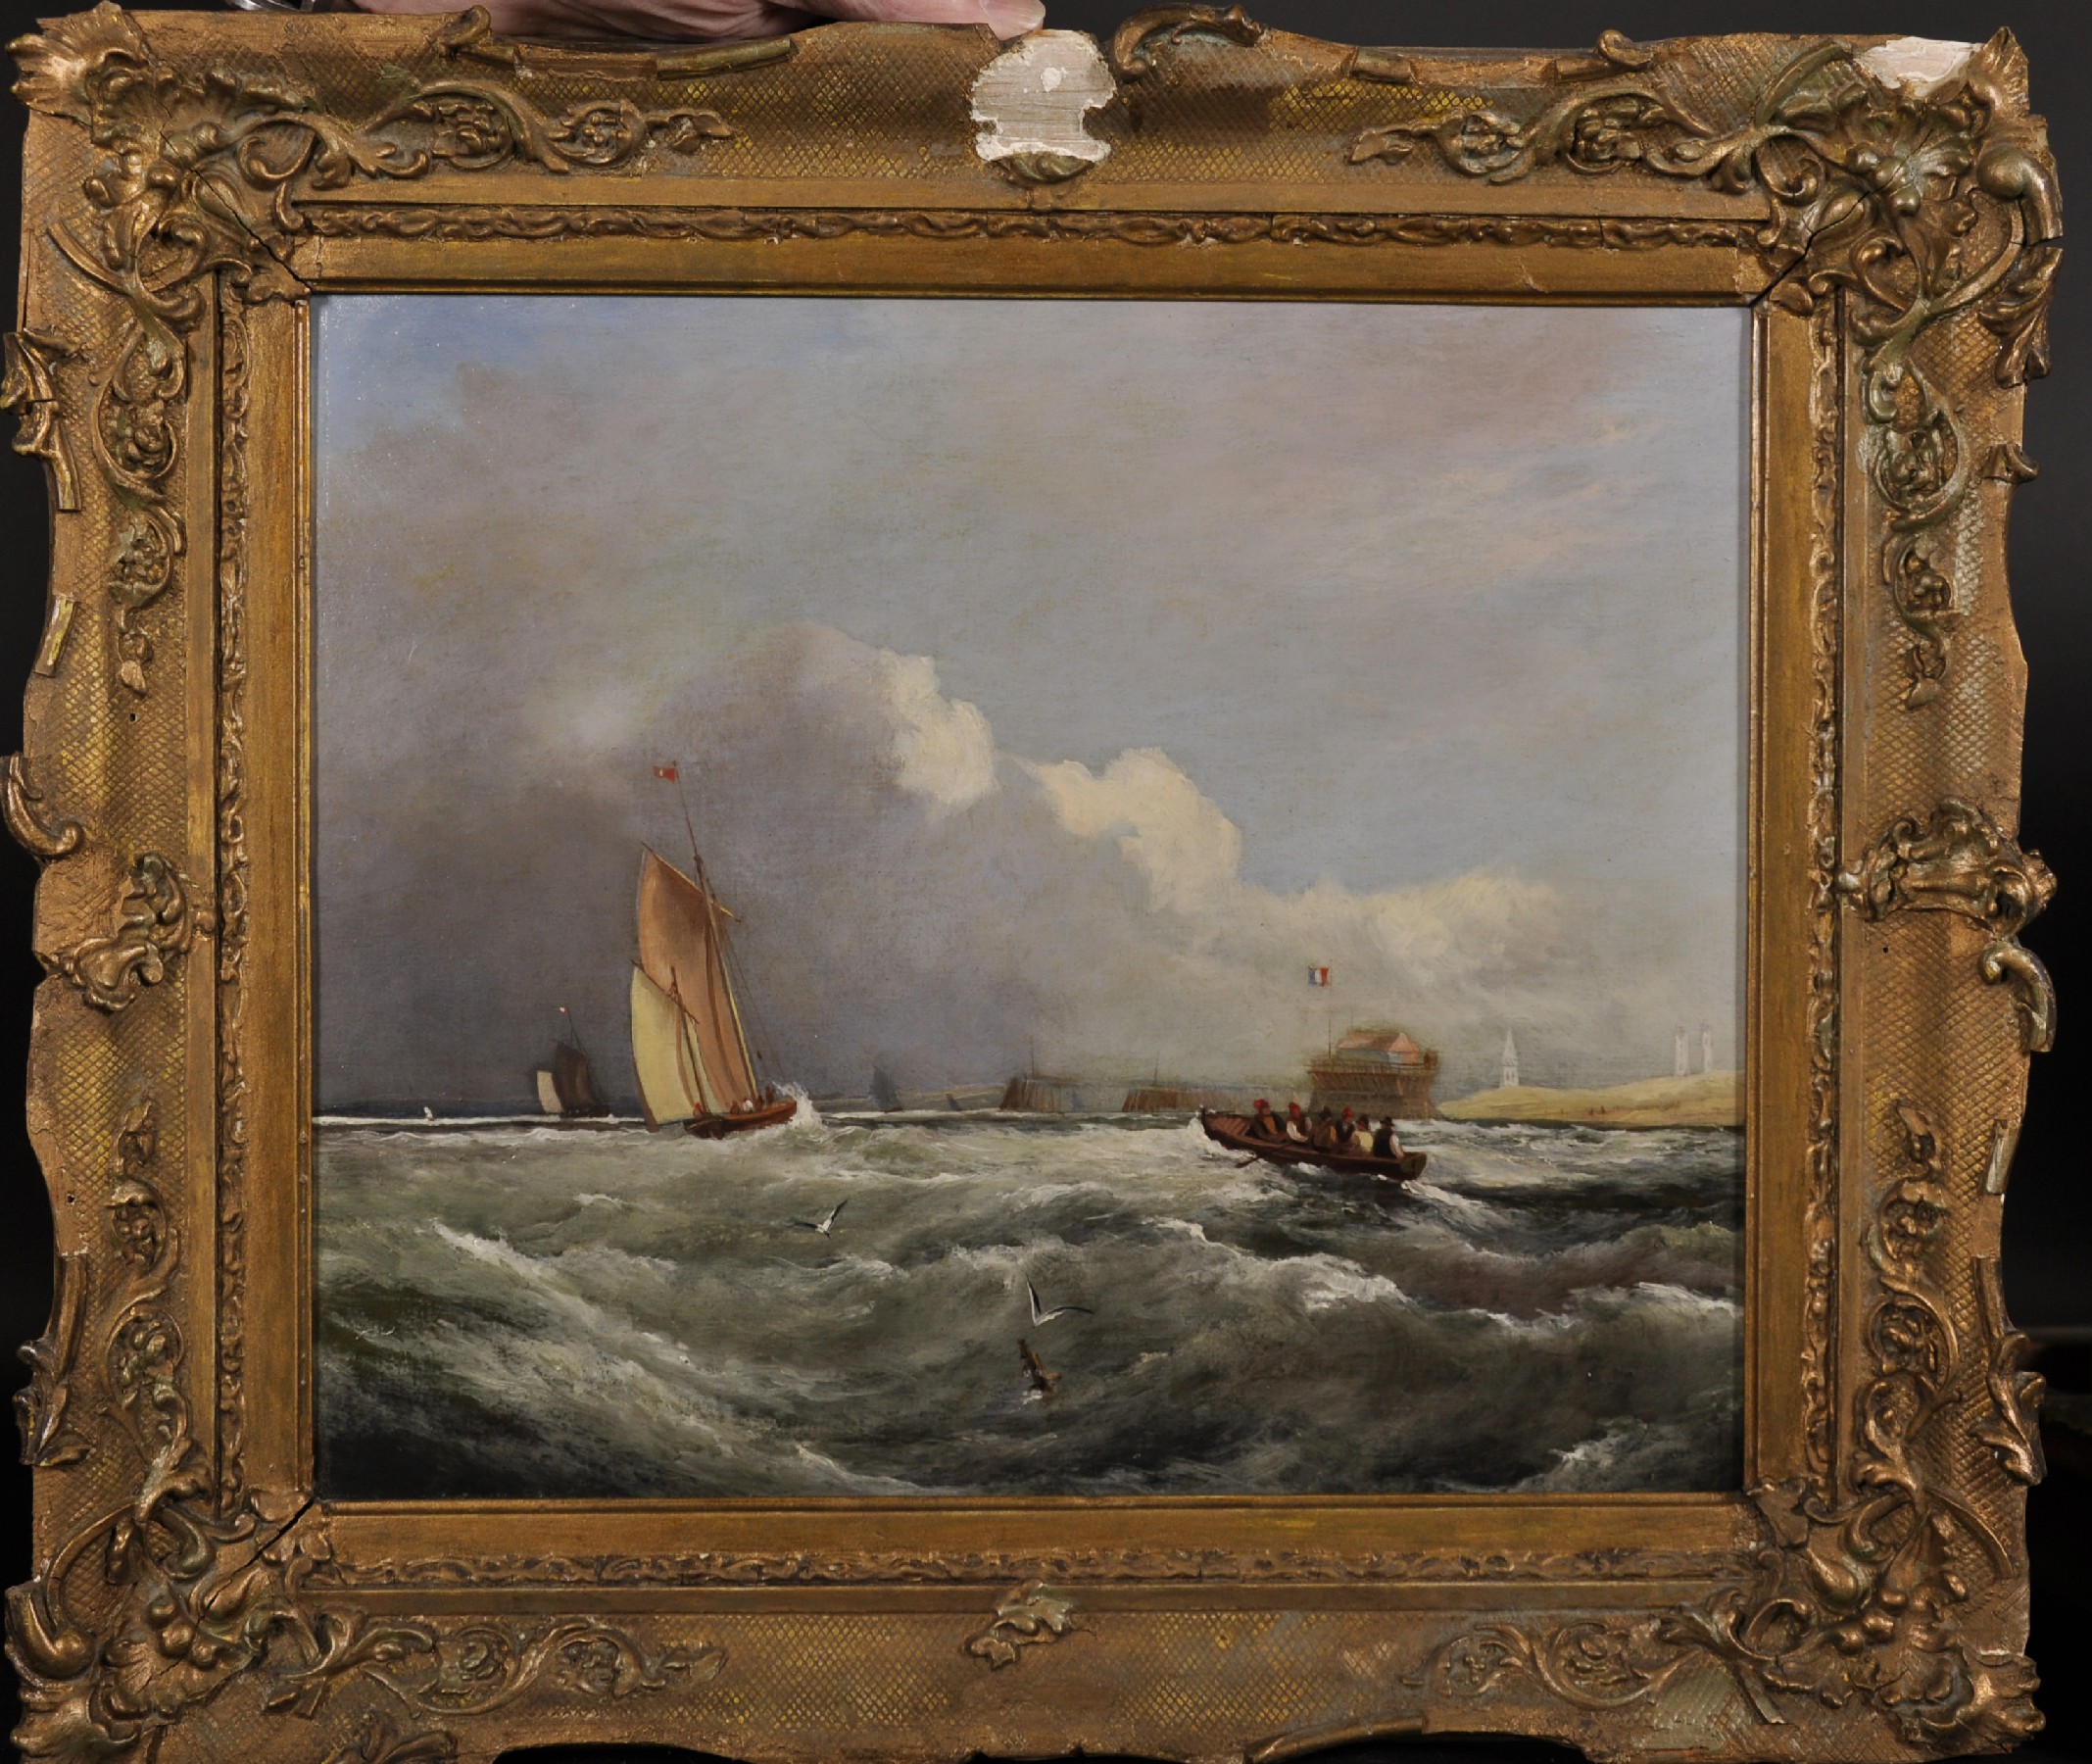 Manner of William Callcott Knell (1830-1880) British. Shipping Scene in Choppy Waters, Oil on Panel, - Image 2 of 3